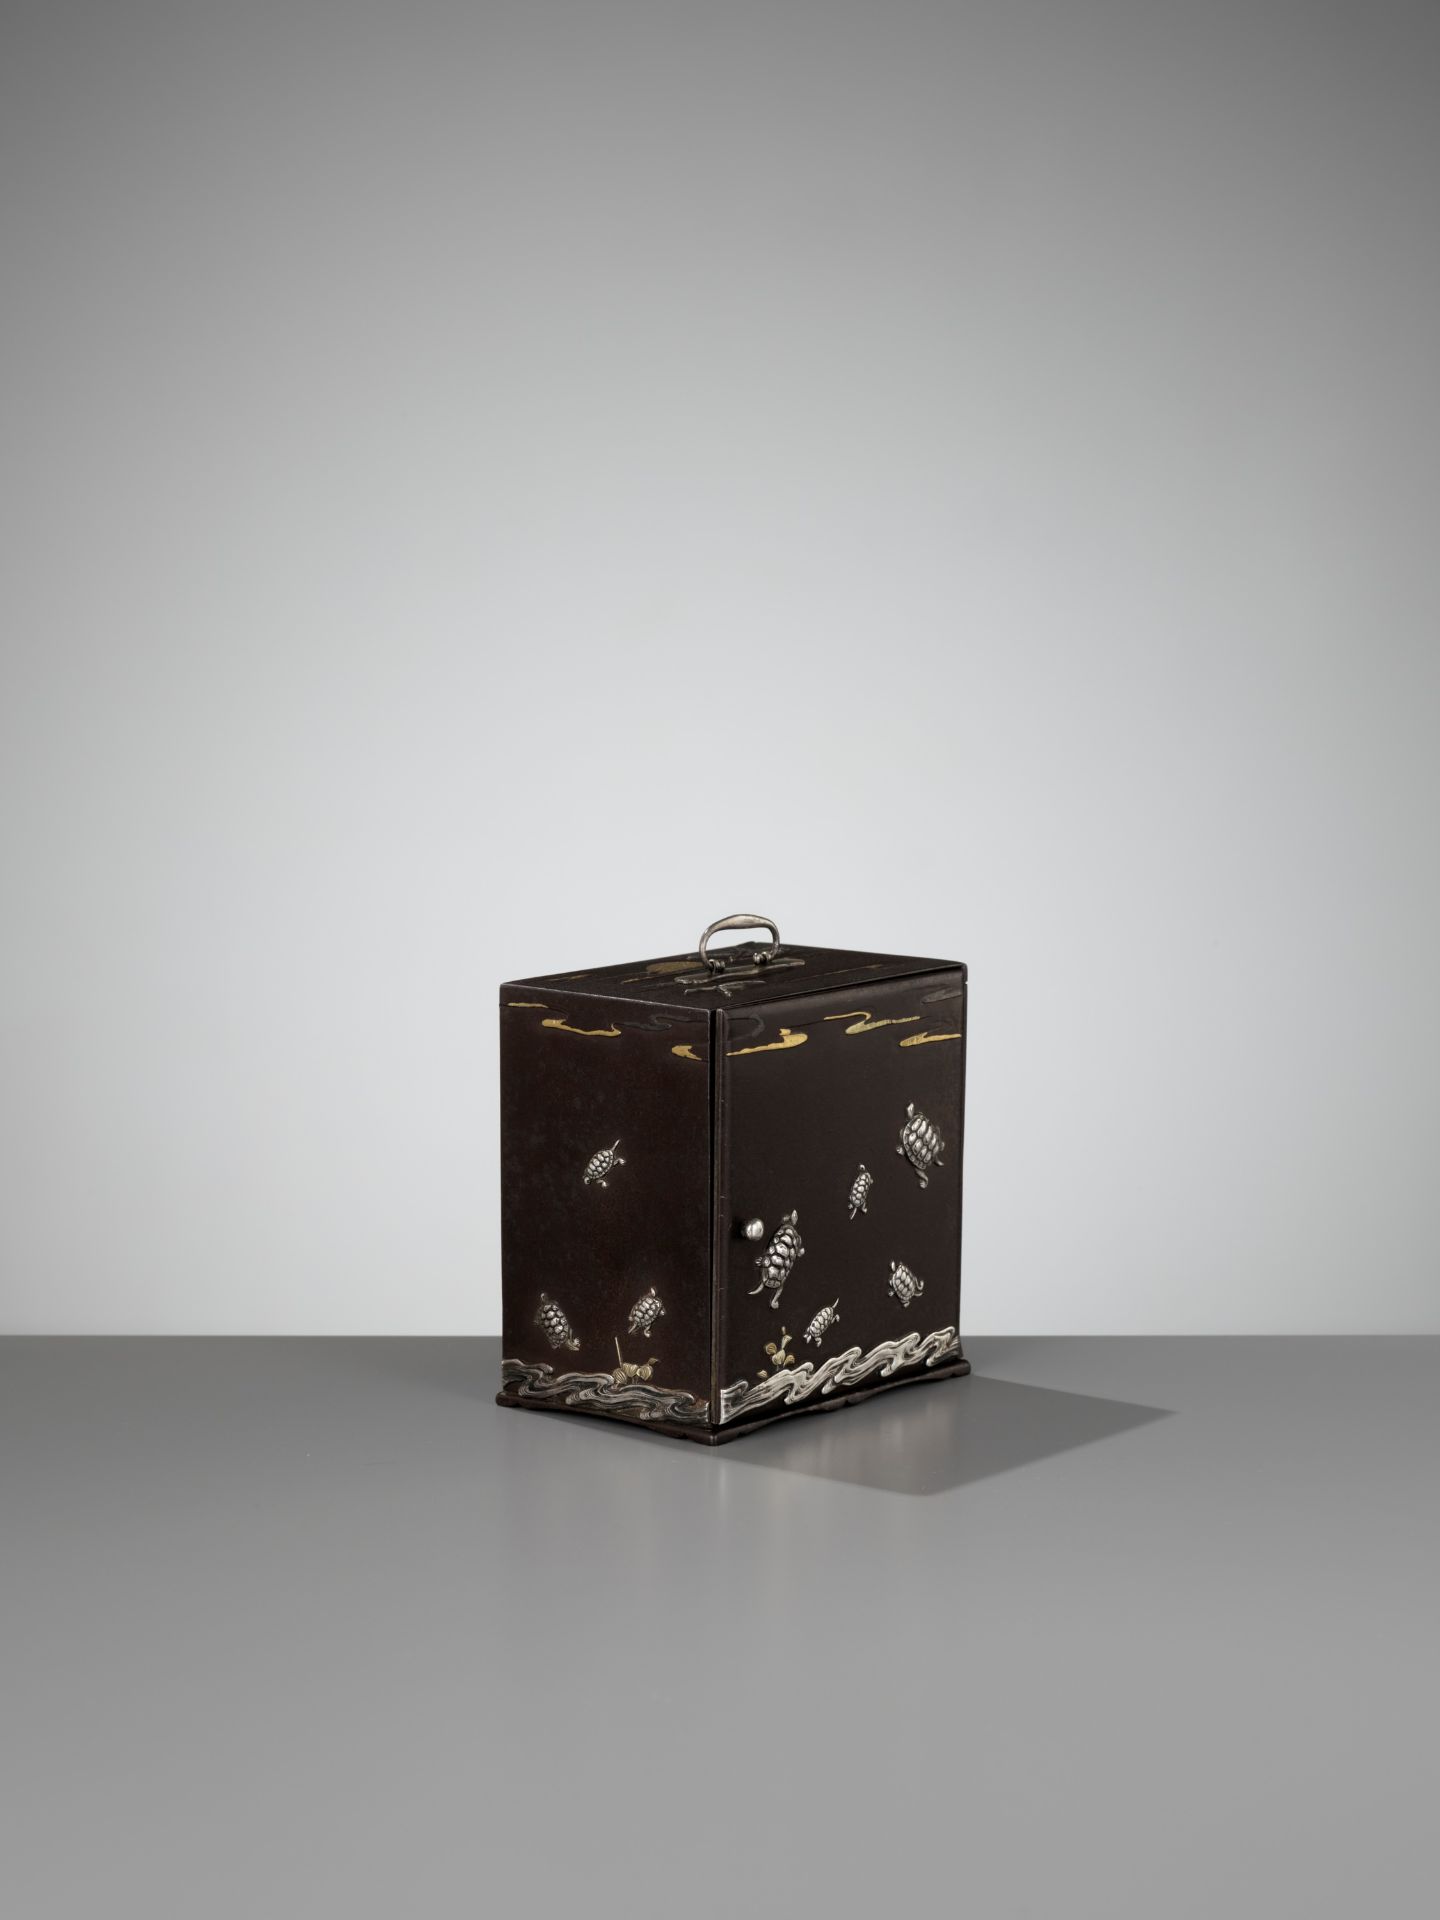 AN EXCEPTIONALLY RARE INLAID IRON MINIATURE KODANSU (CABINET) WITH TURTLES AND CRANES - Image 3 of 12